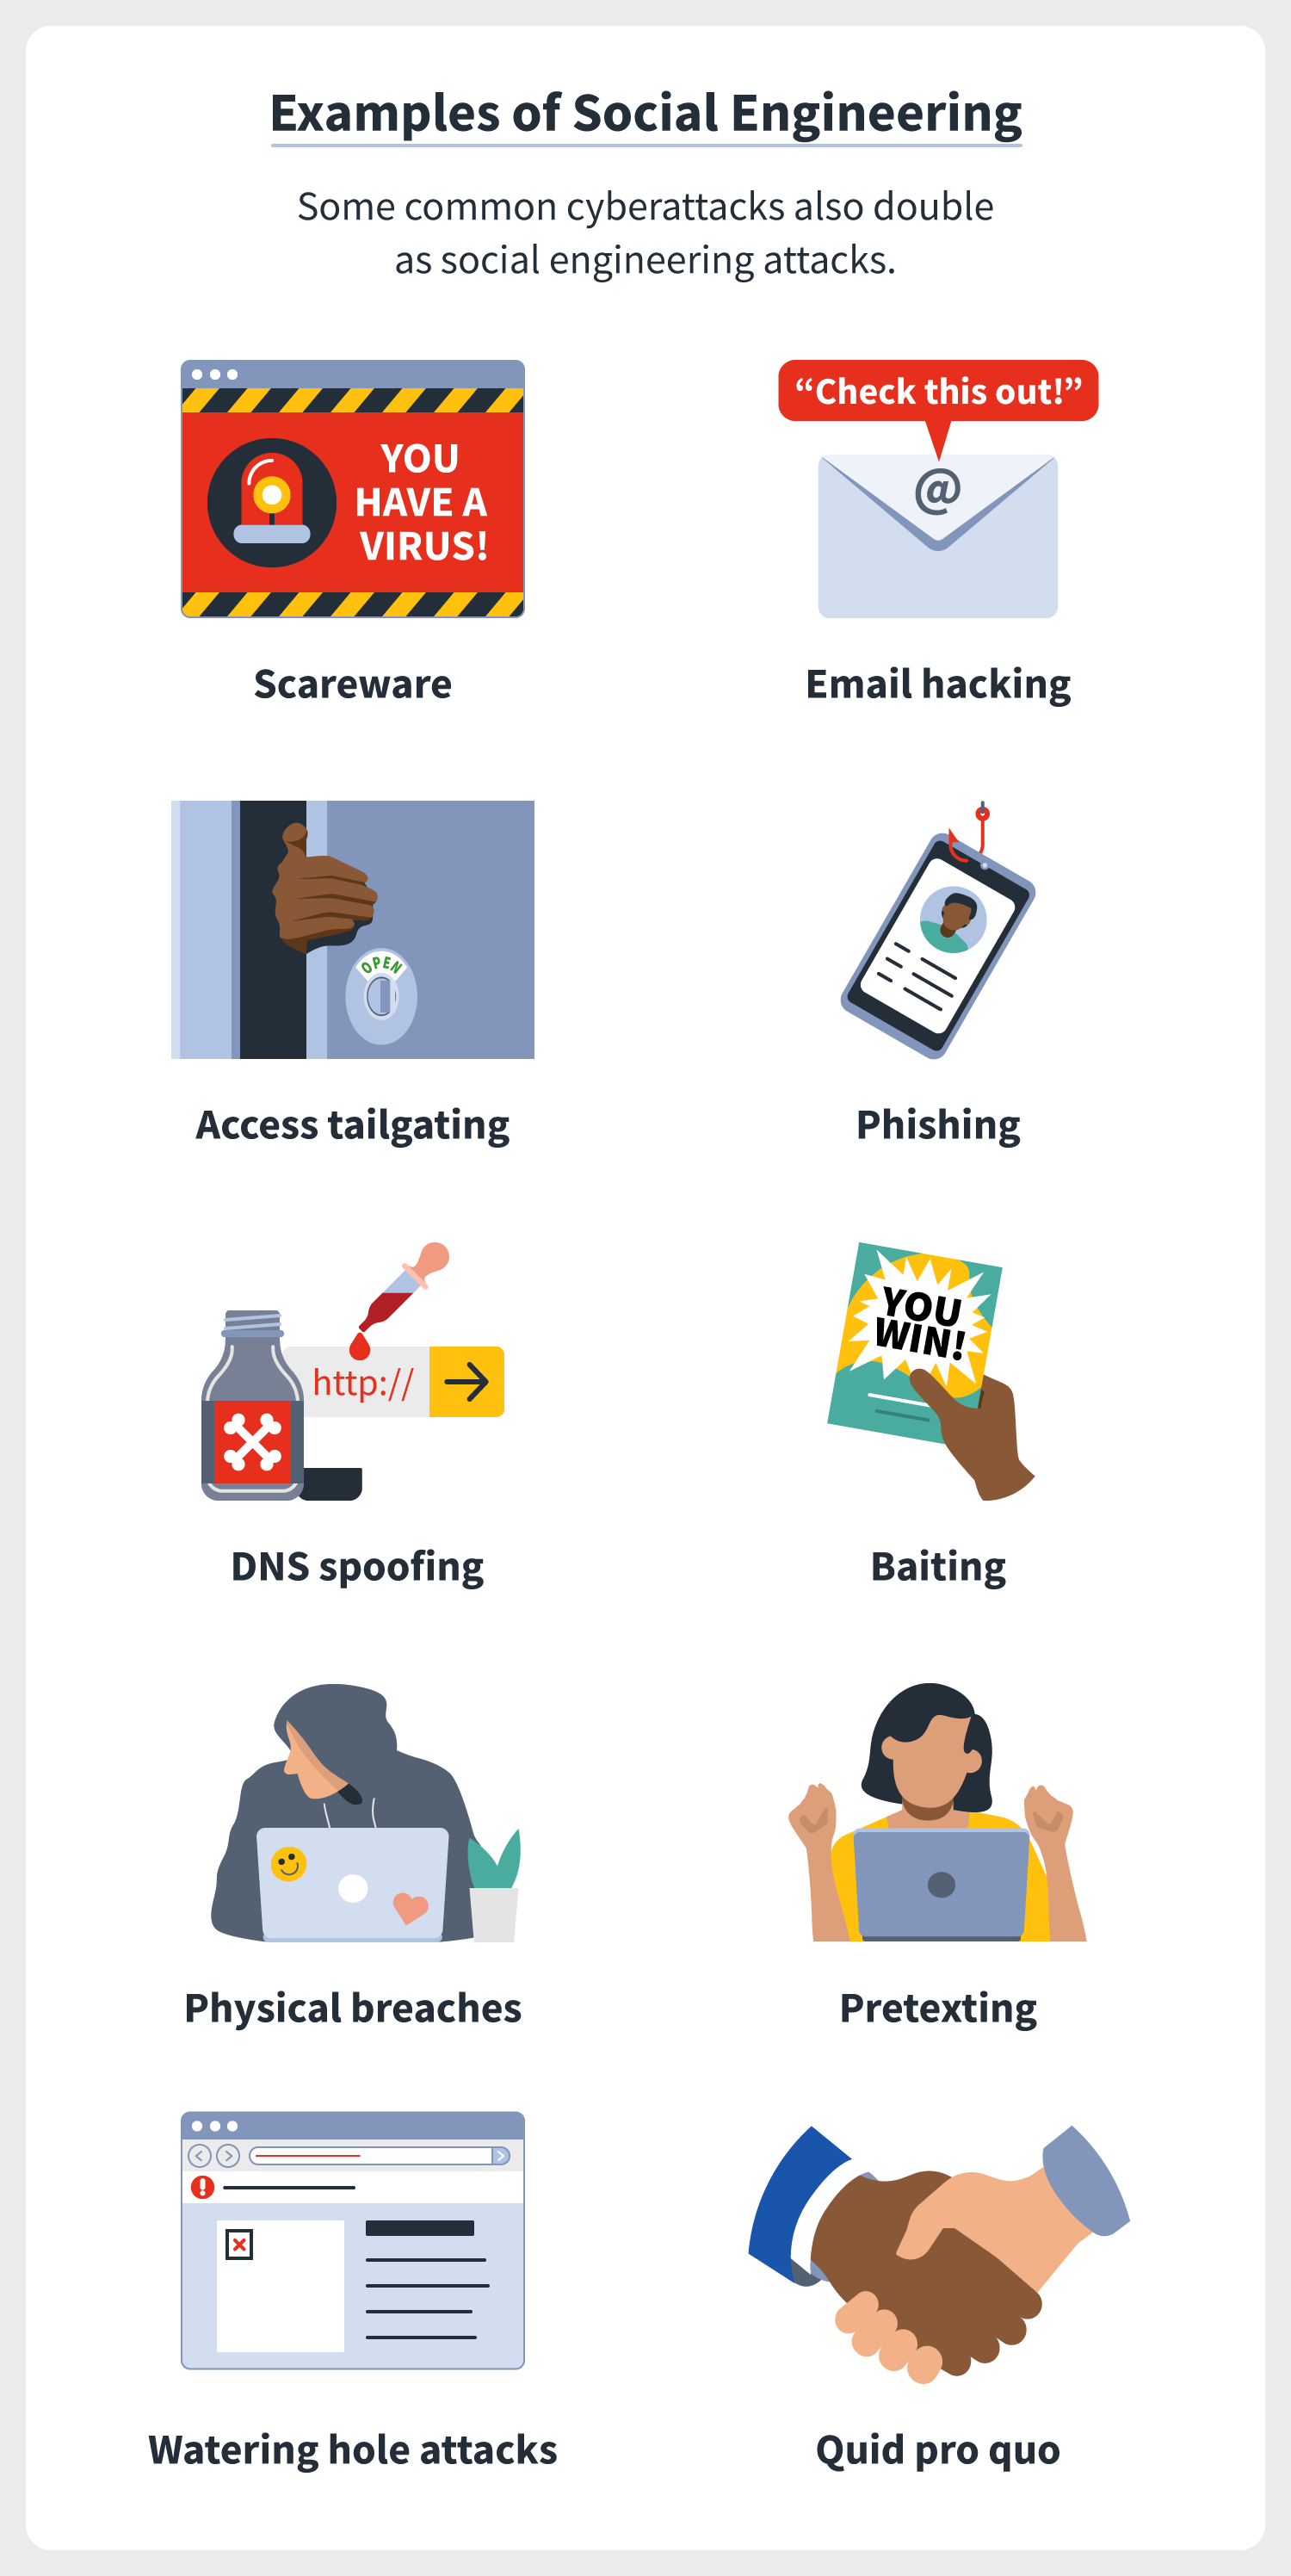 10 illustrations represent cyber attack types that double as social engineering attacks, including pretexting, watering hole attacks, DNS spoofing, and baiting